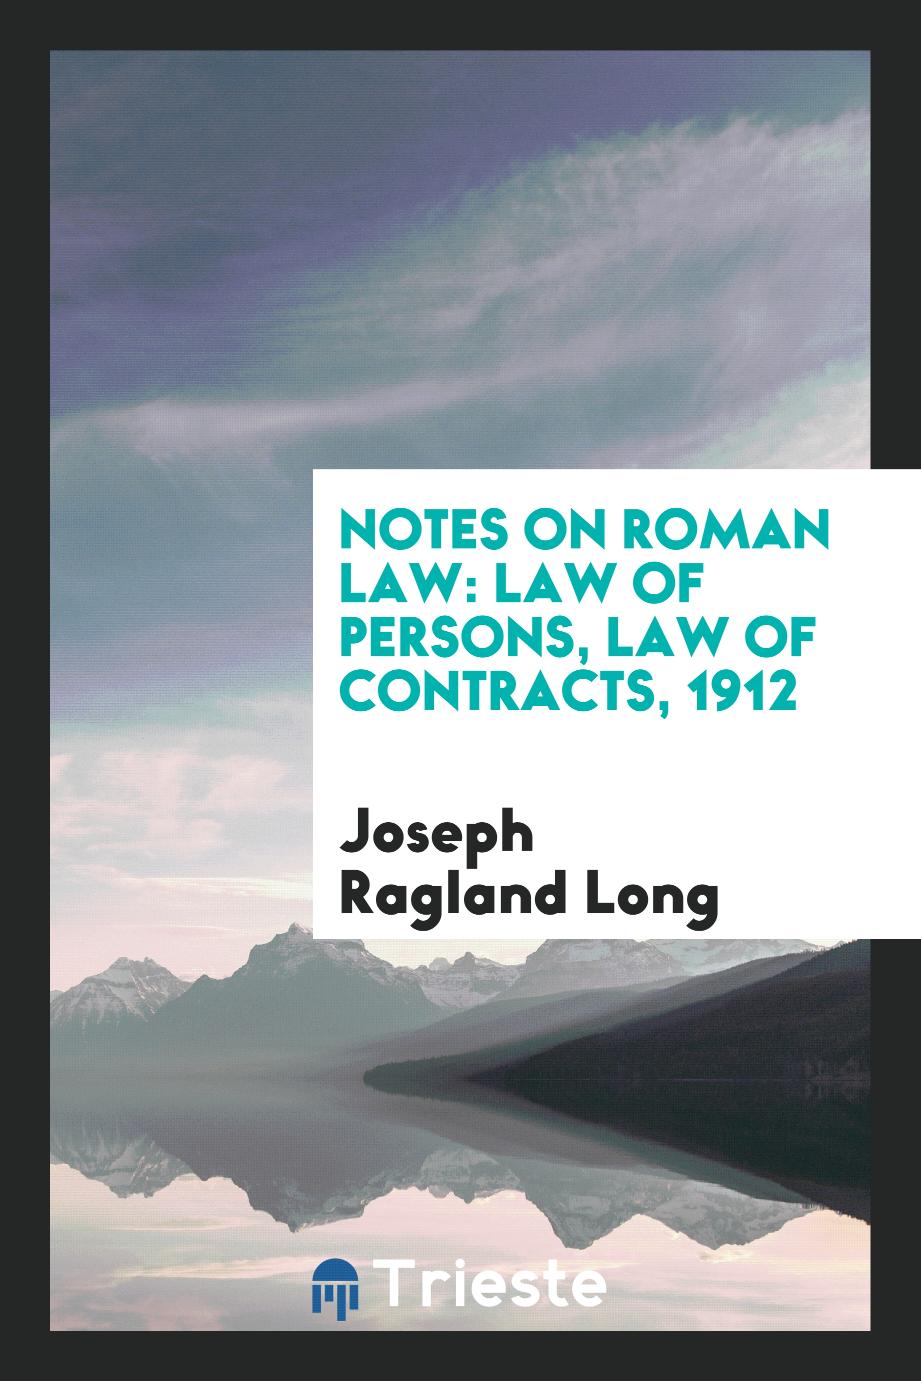 Notes on Roman Law: Law of Persons, Law of Contracts, 1912